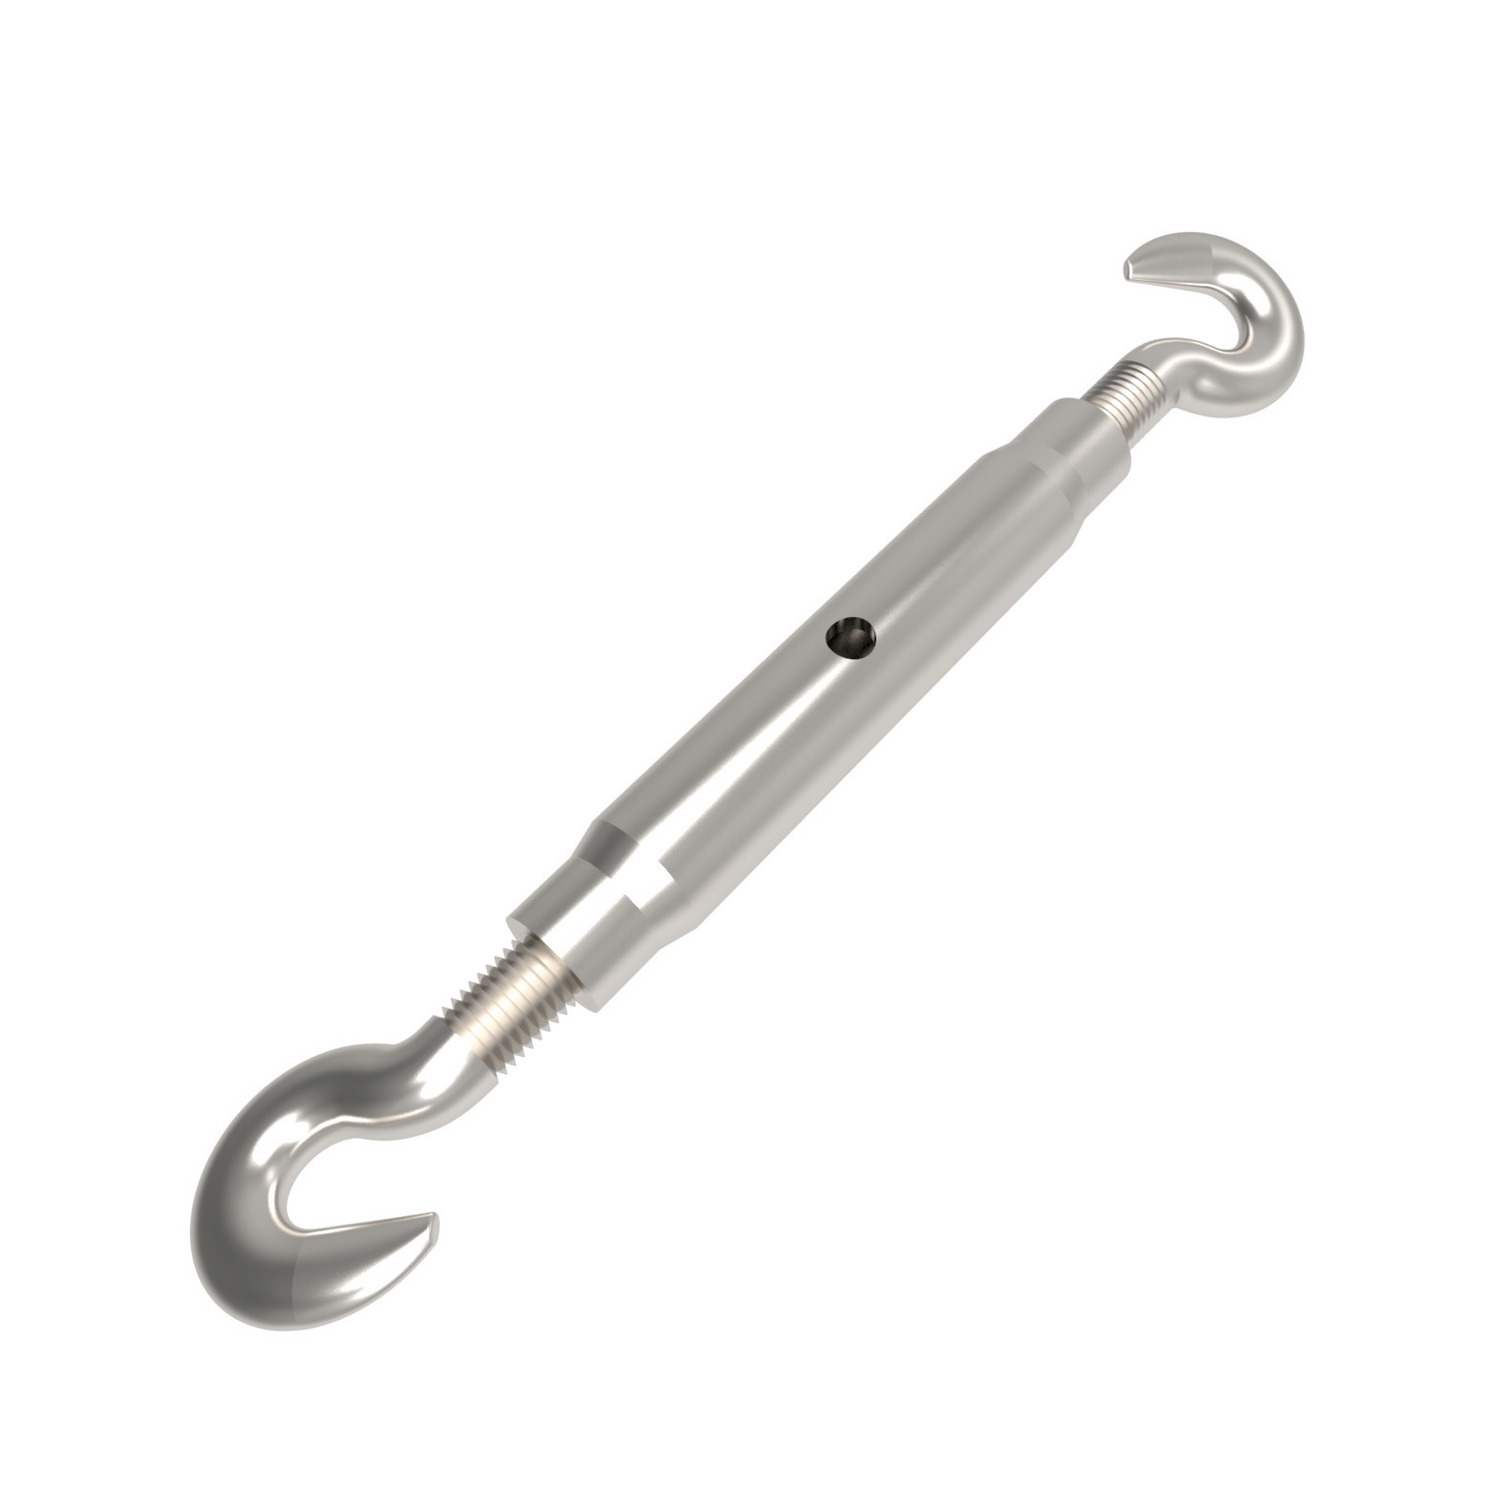 Product R3818, Hook End Pipe Body Turnbuckles stainless steel / 